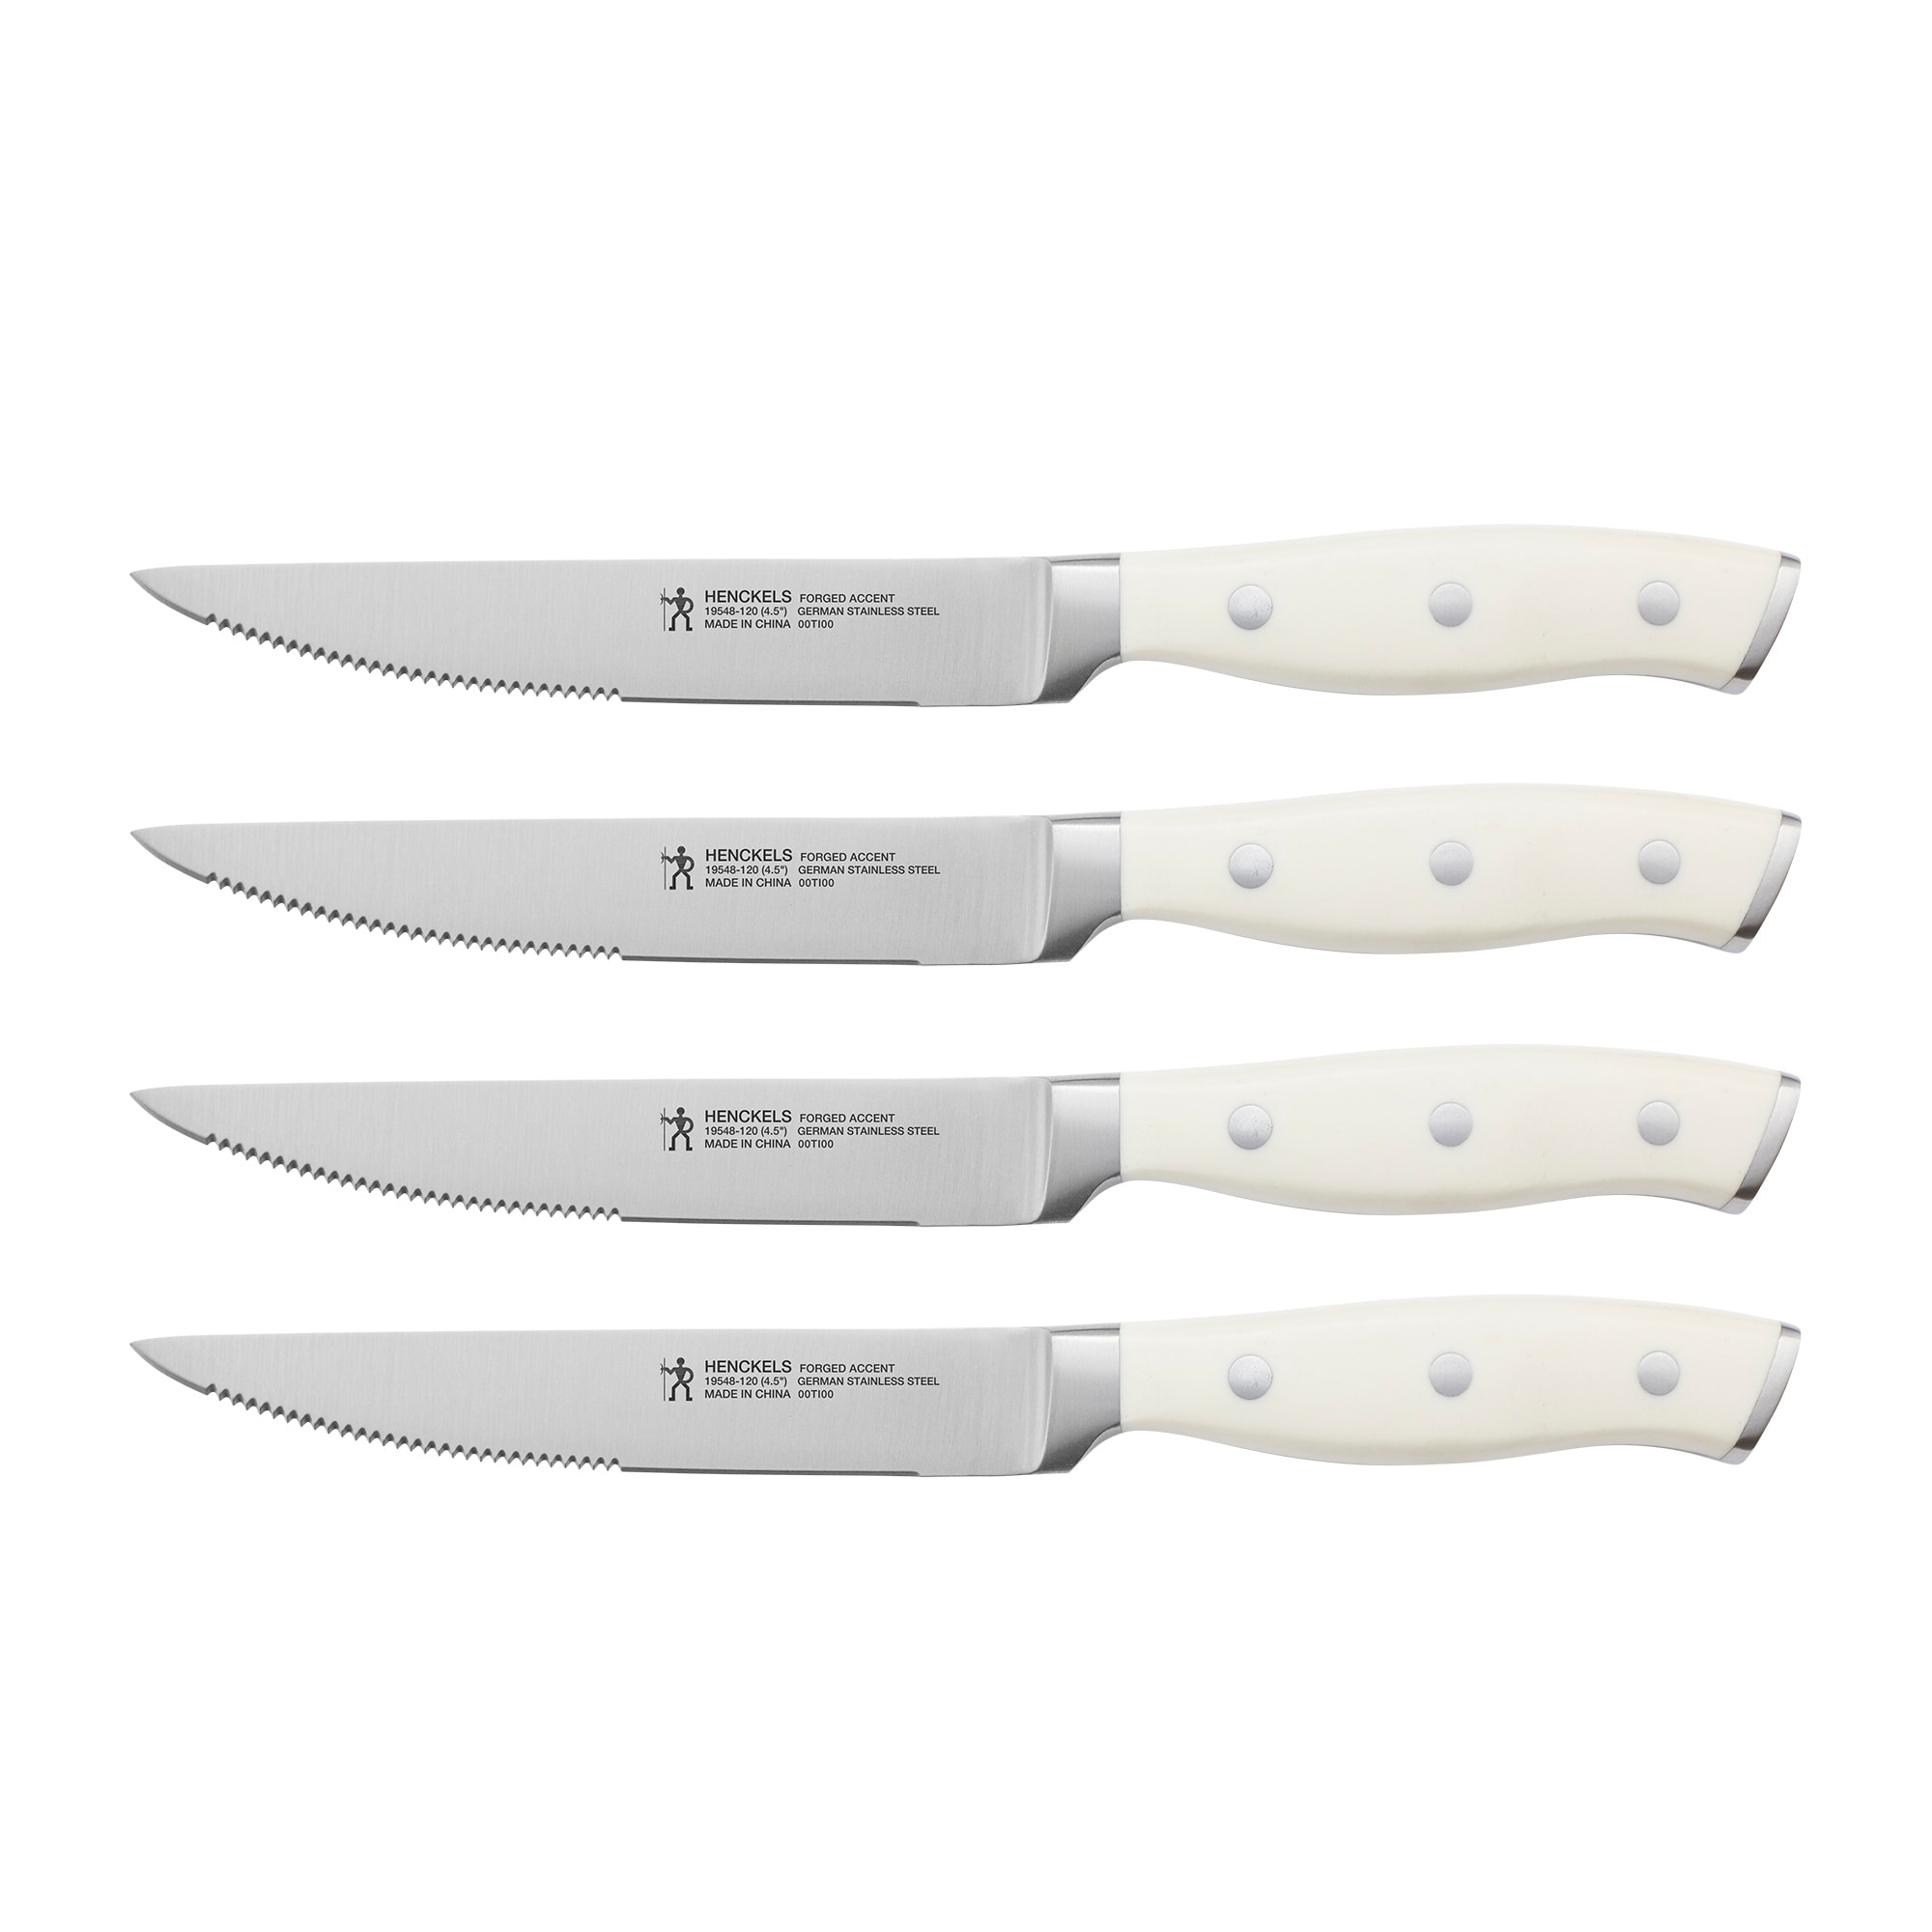 https://ak1.ostkcdn.com/images/products/is/images/direct/bba4ca2421295cf40033b06b42c4700d195e39c5/Henckels-Forged-Accent-4-pc-Steak-Knife-Set.jpg